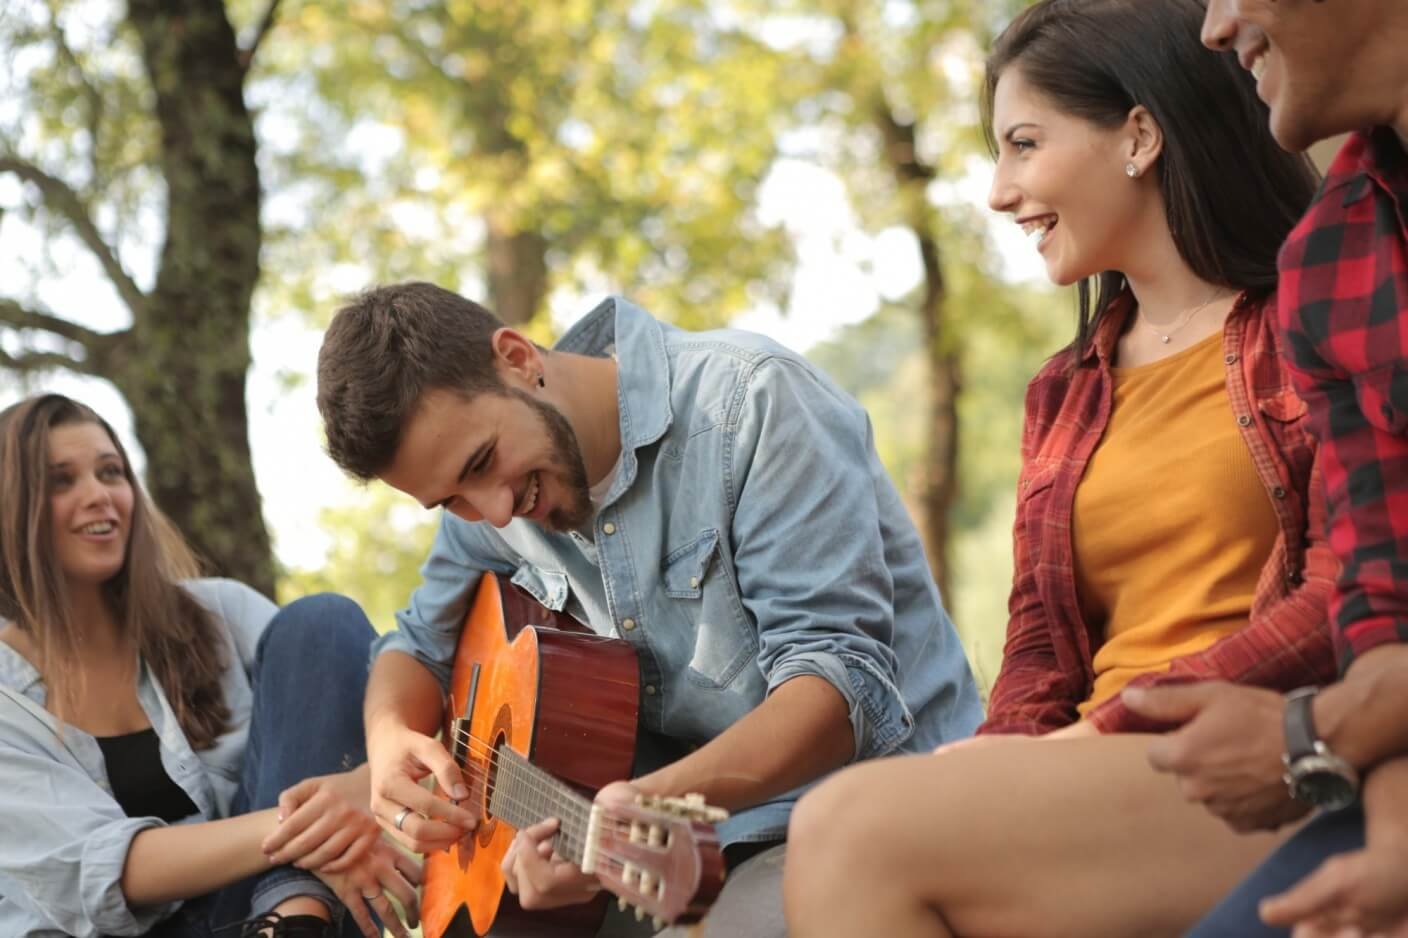 Man playing guitar with friends